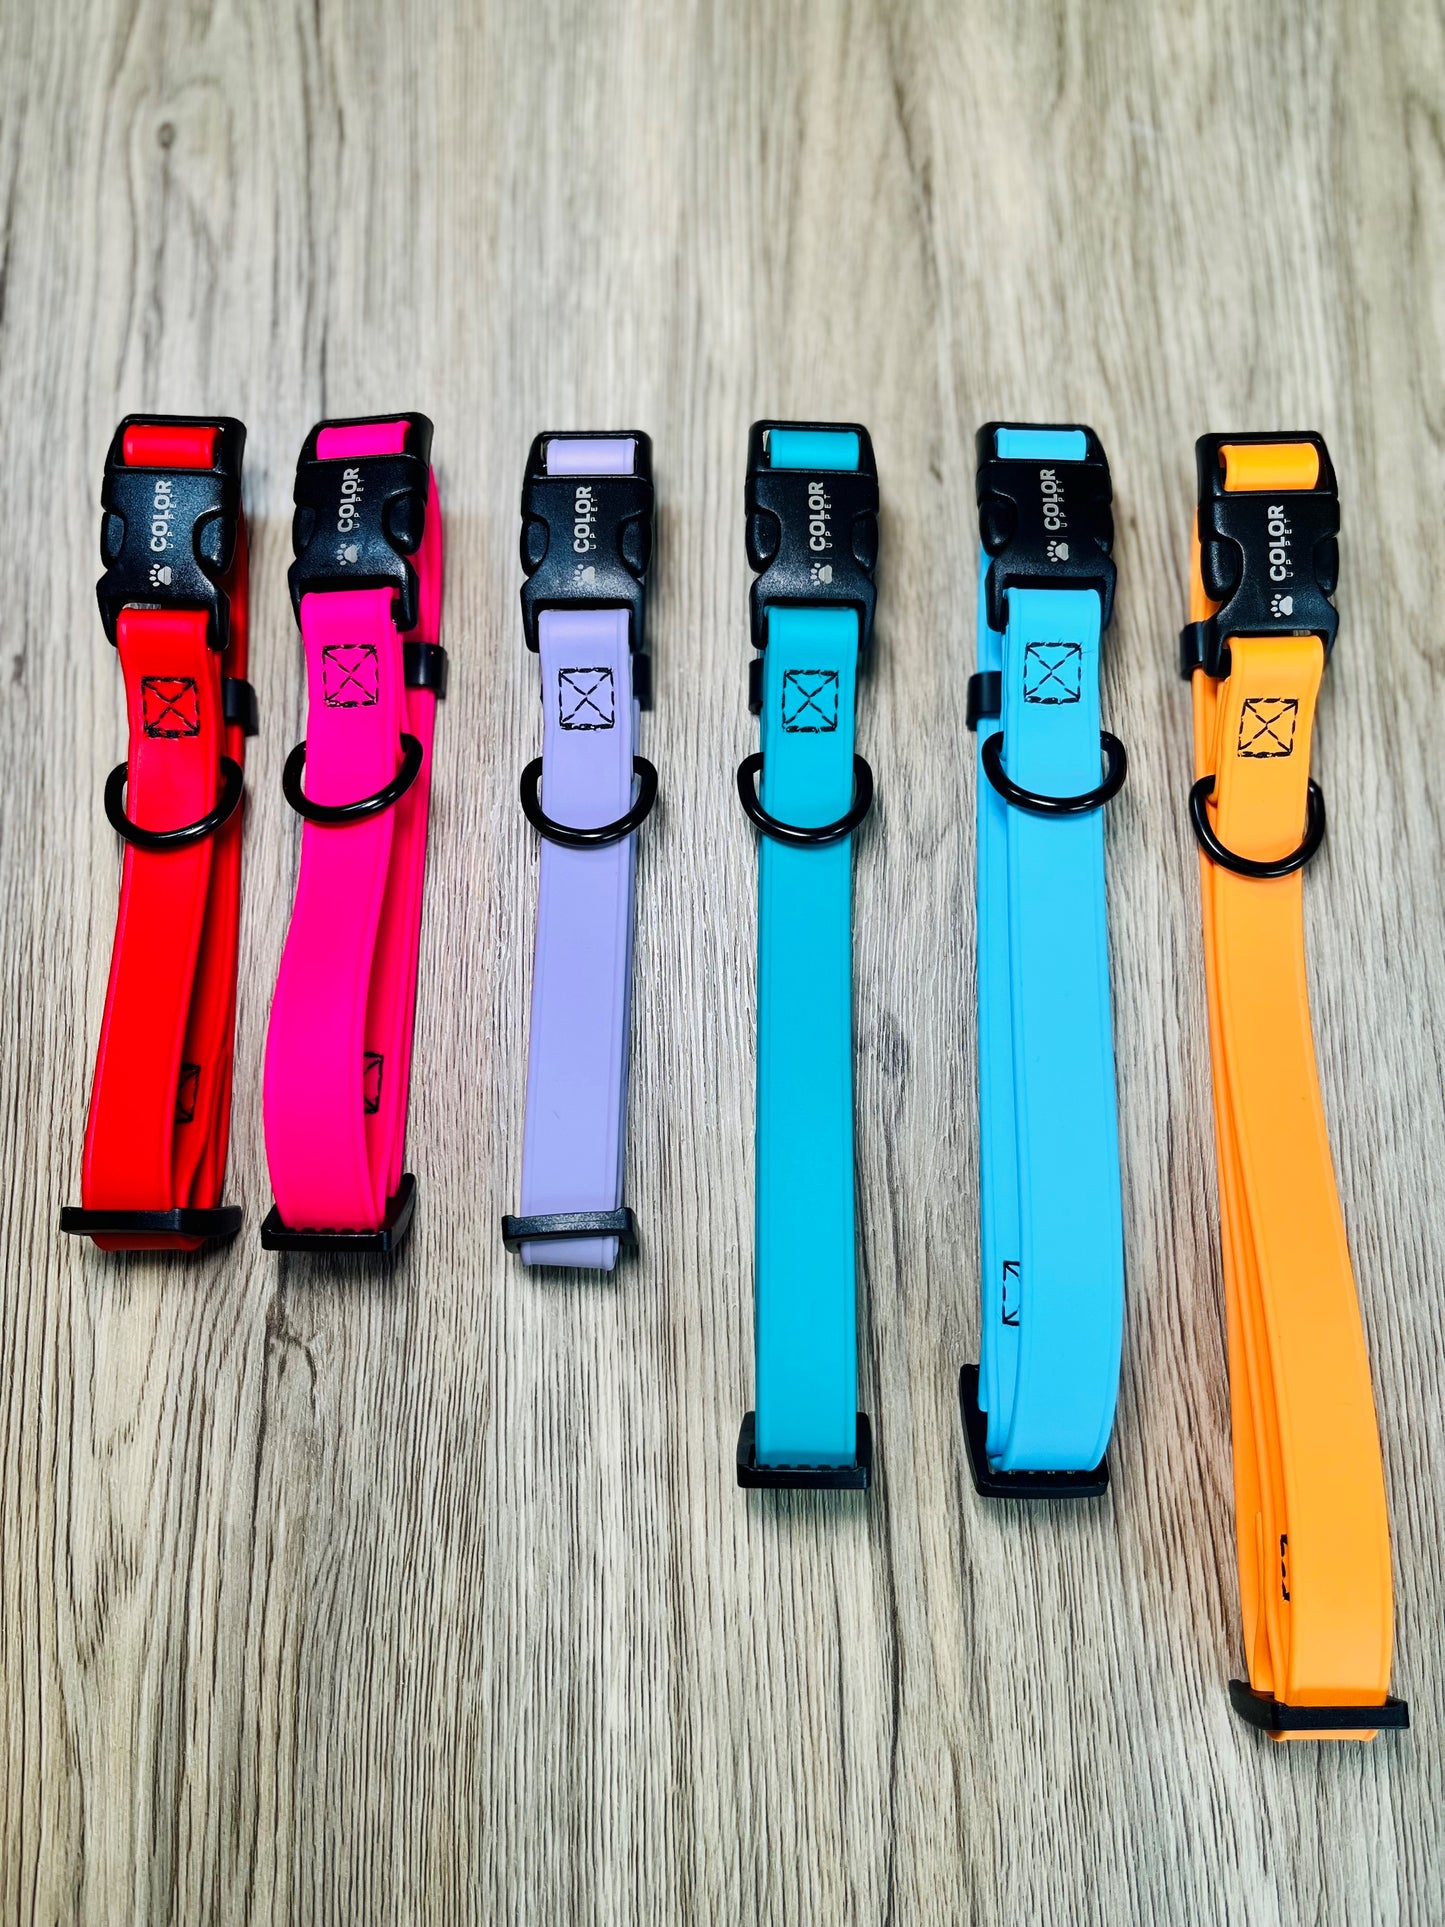 3/4" Width Adjustable Biothane Collars with side release buckle. Waterproof, won't hold odors and easy to clean. Will not trap moisture against dogs coat and extremely durable. 